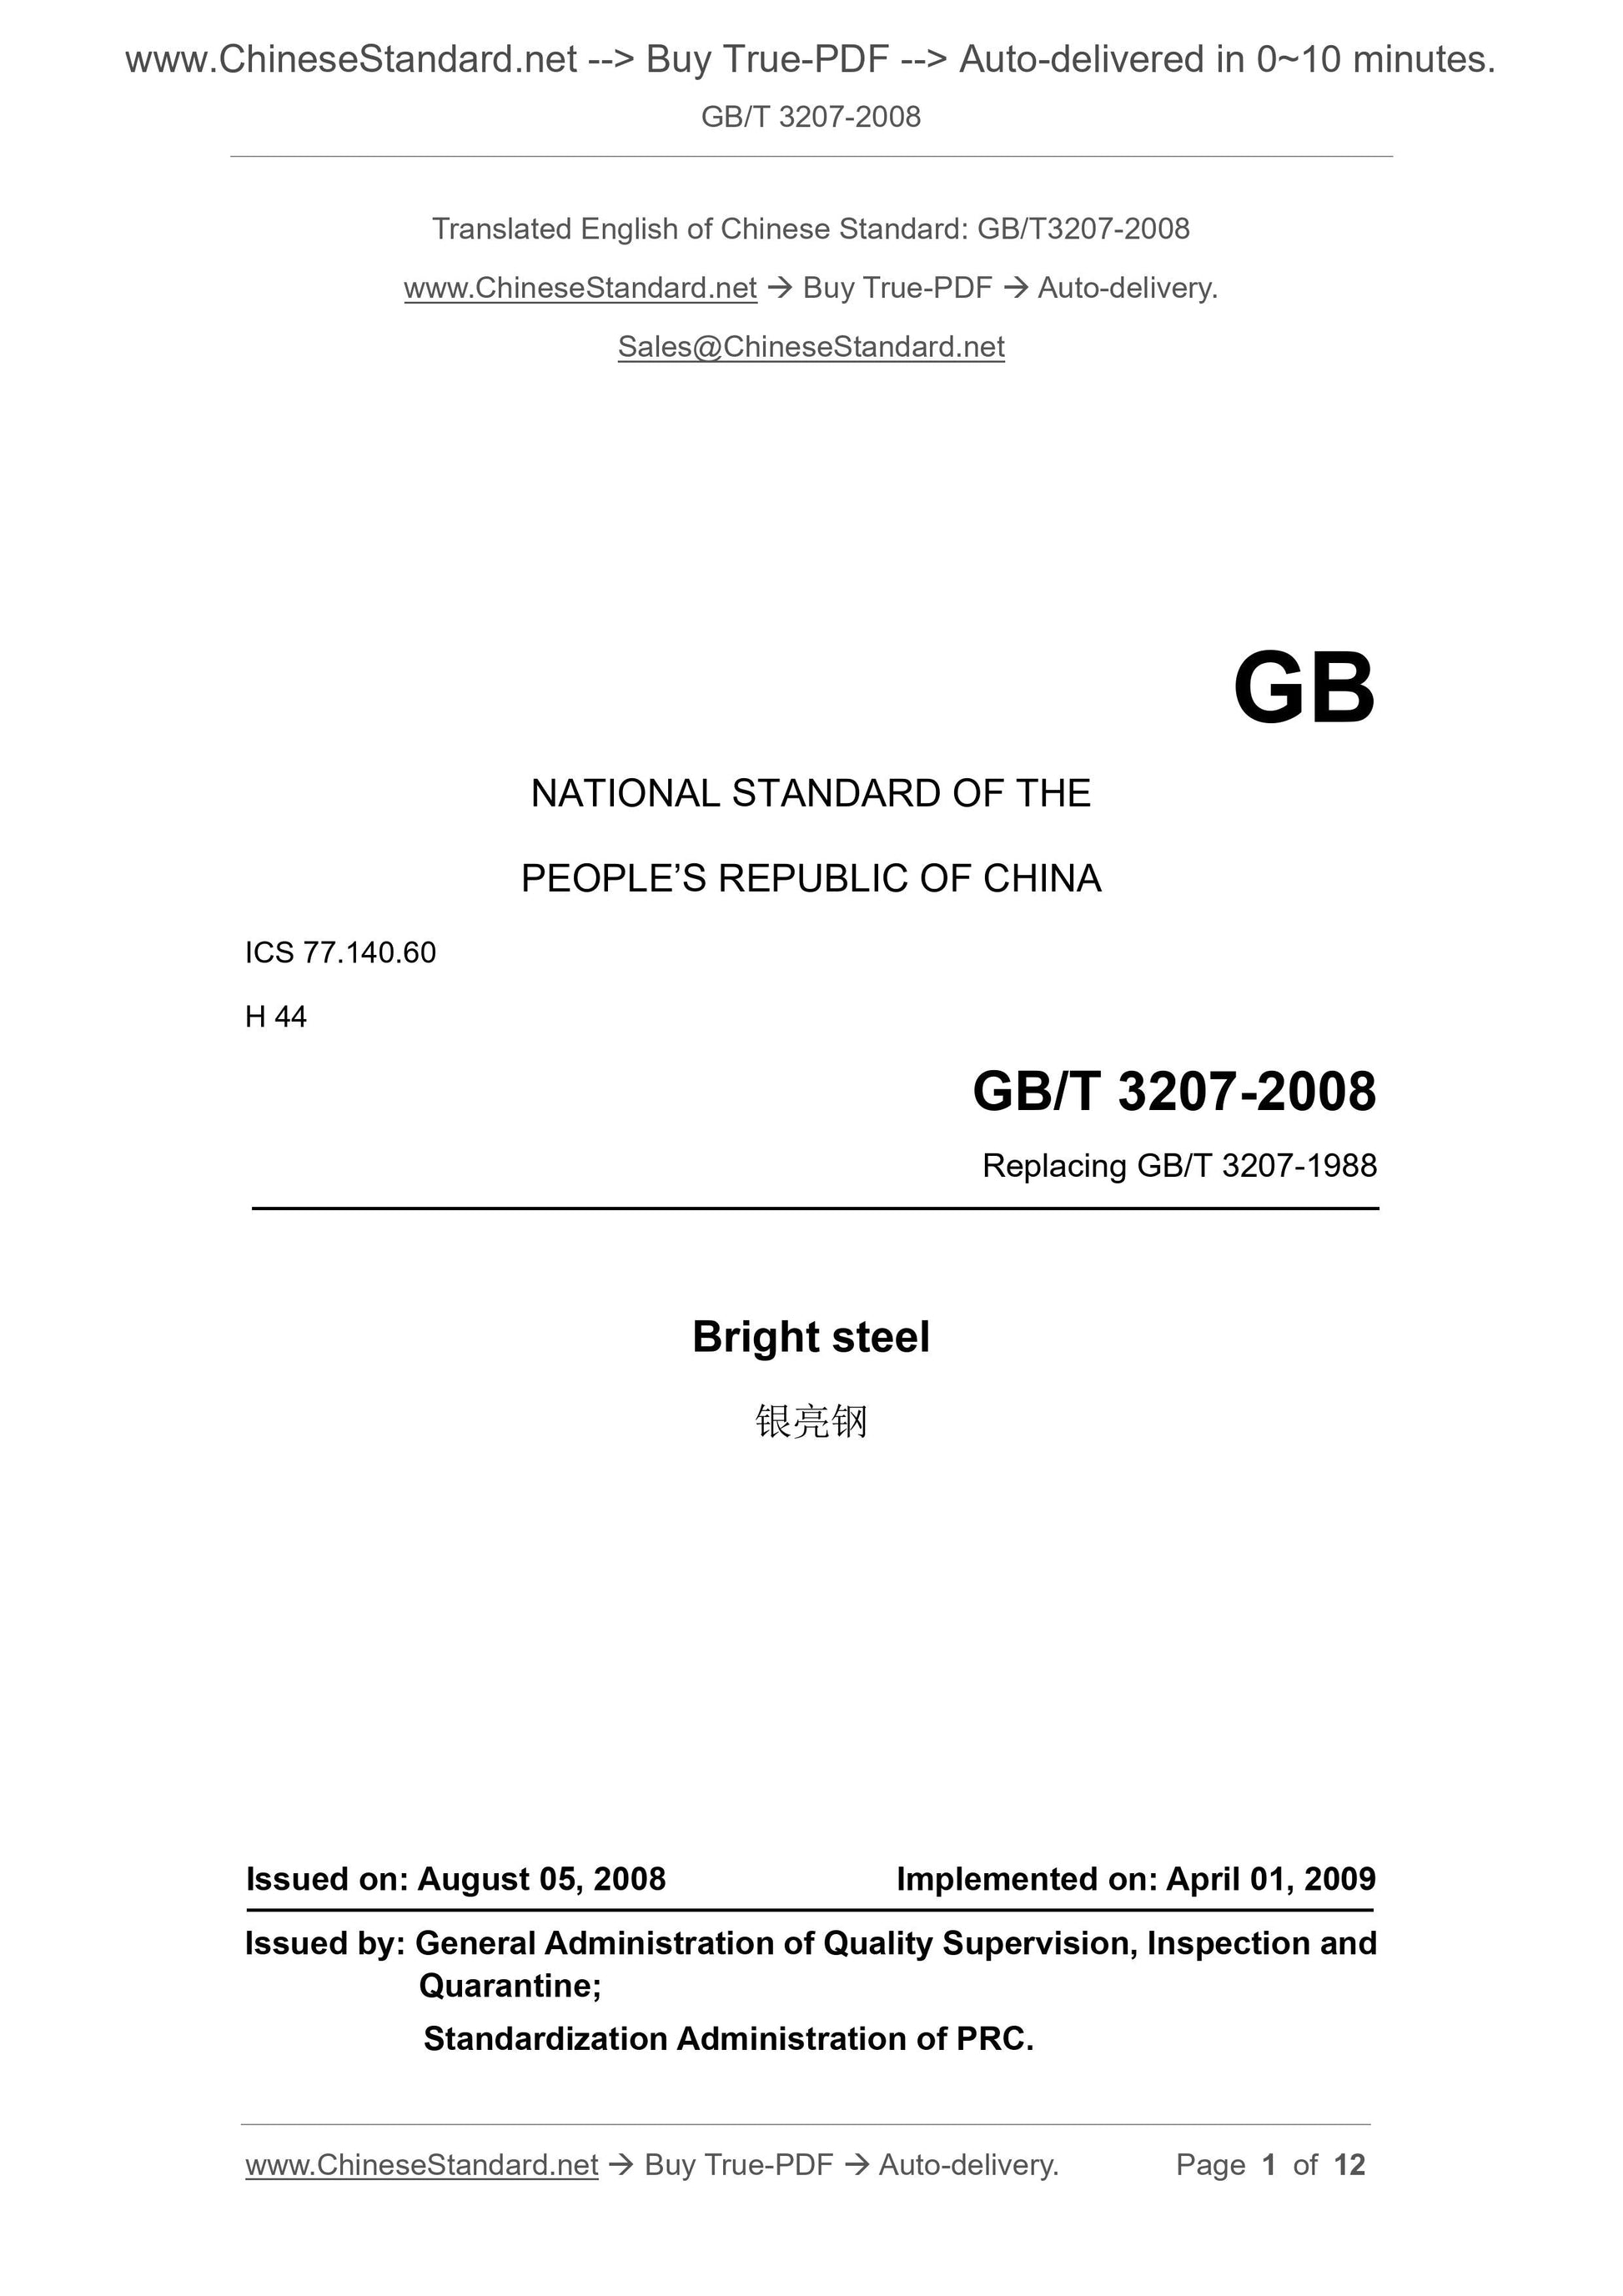 GB/T 3207-2008 Page 1